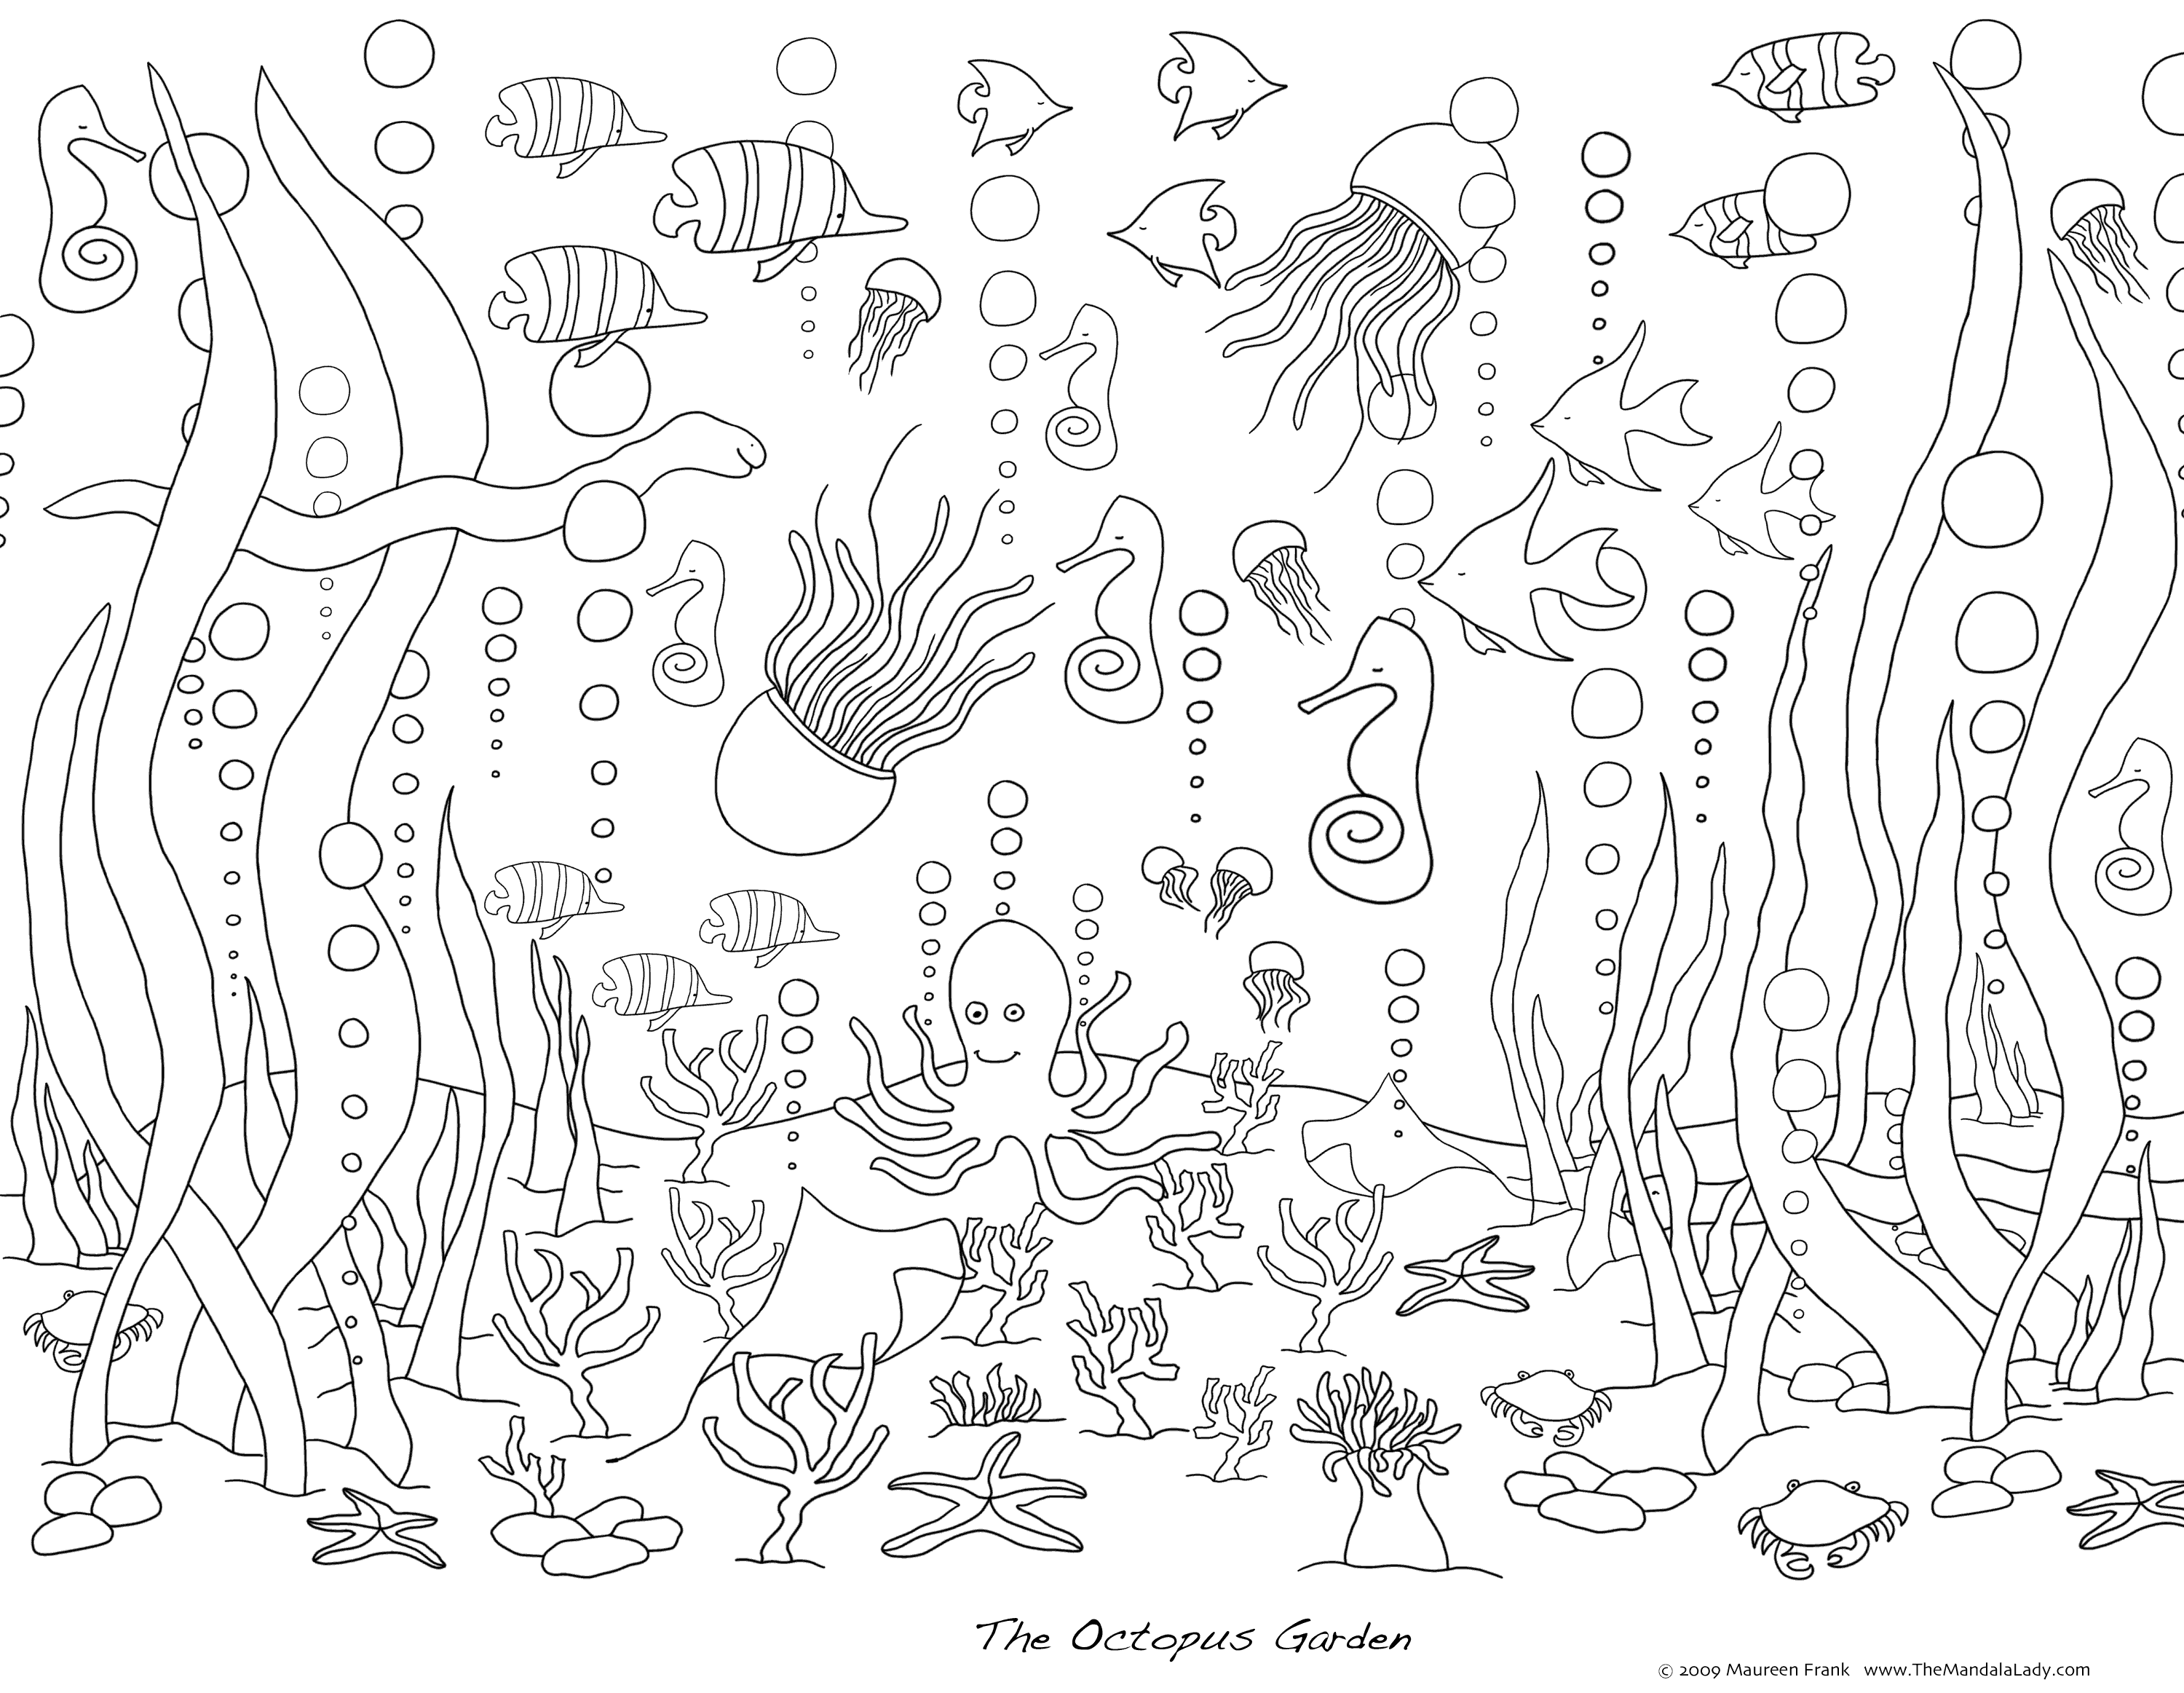 Ocean Waves Coloring Pages Coloring Home